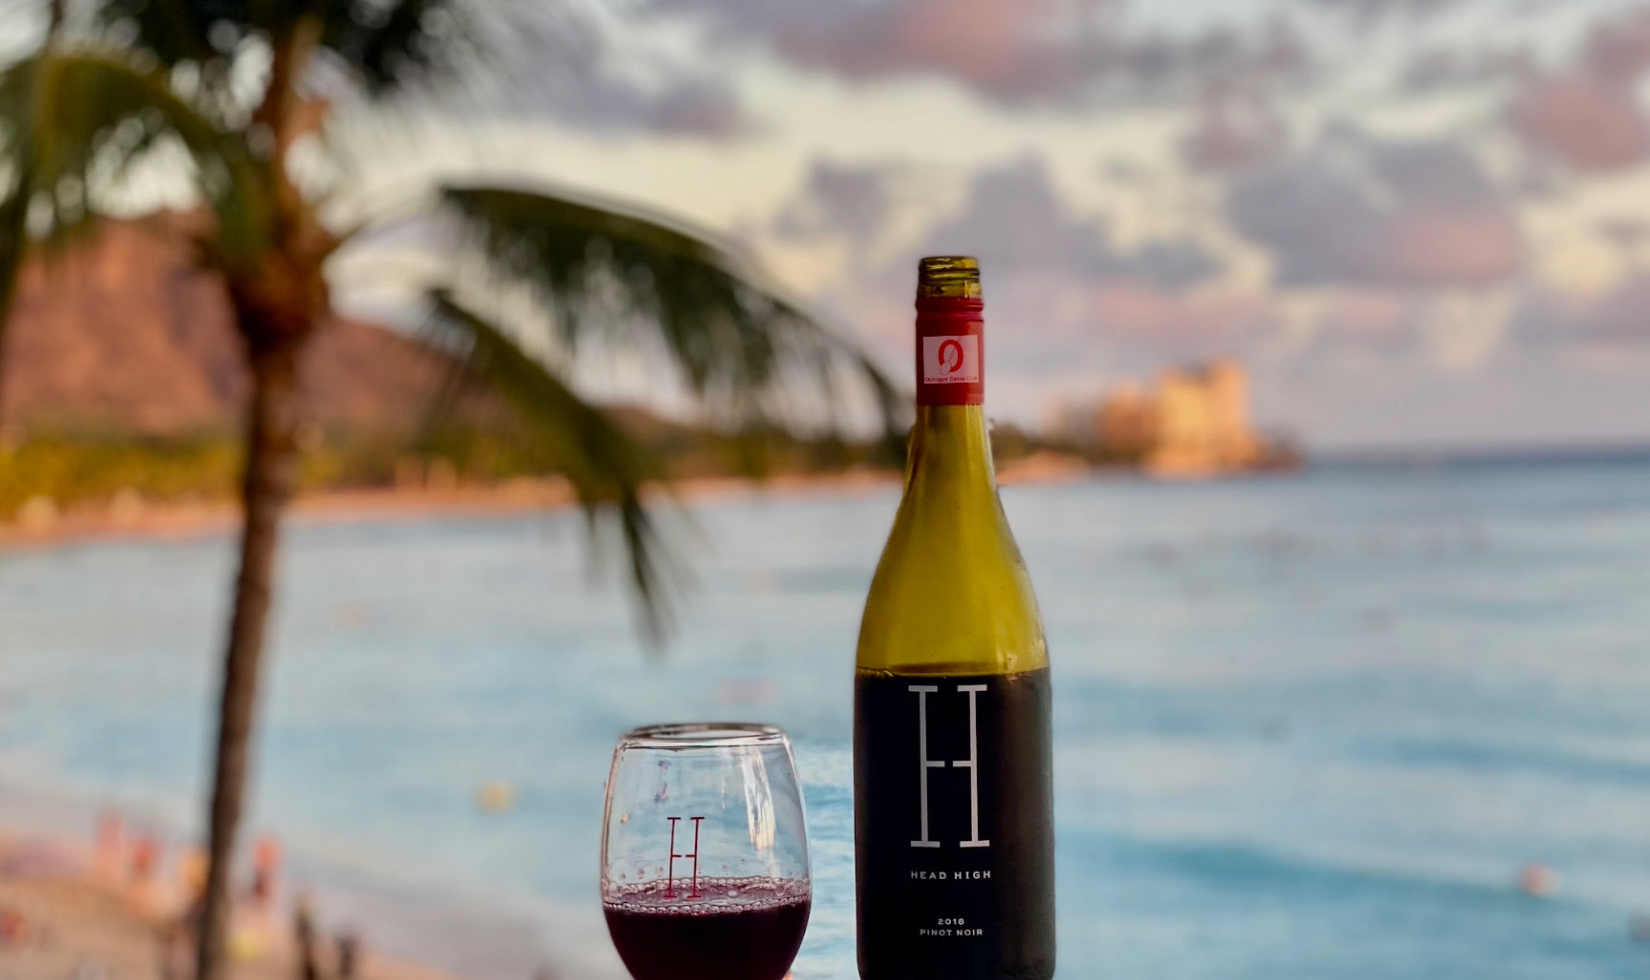 Bottle of Head High Pinot Noir with a stemless glass with wine on a balcony railing overlooking the beach and ocean in Hawaii. 